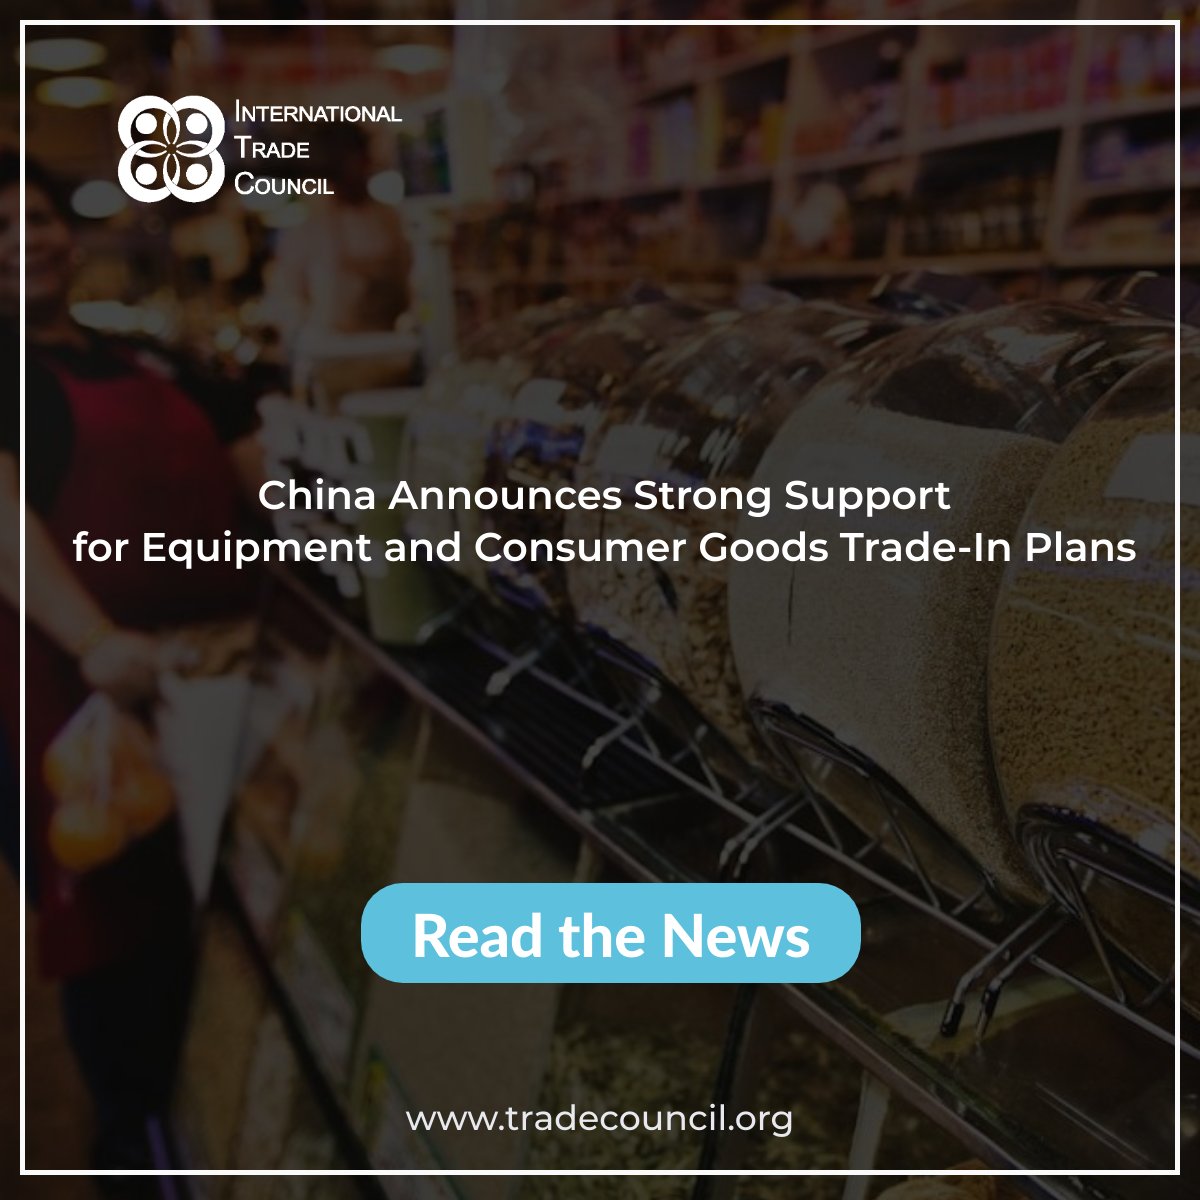 China Announces Strong Support for Equipment and Consumer Goods Trade-In Plans
Read The News: tradecouncil.org/china-announce…
#ITCNewsUpdates #BreakingNews #ChineseEconomy #EconomicGrowth #TradeInitiatives #FinancialSupport #DomesticDemand